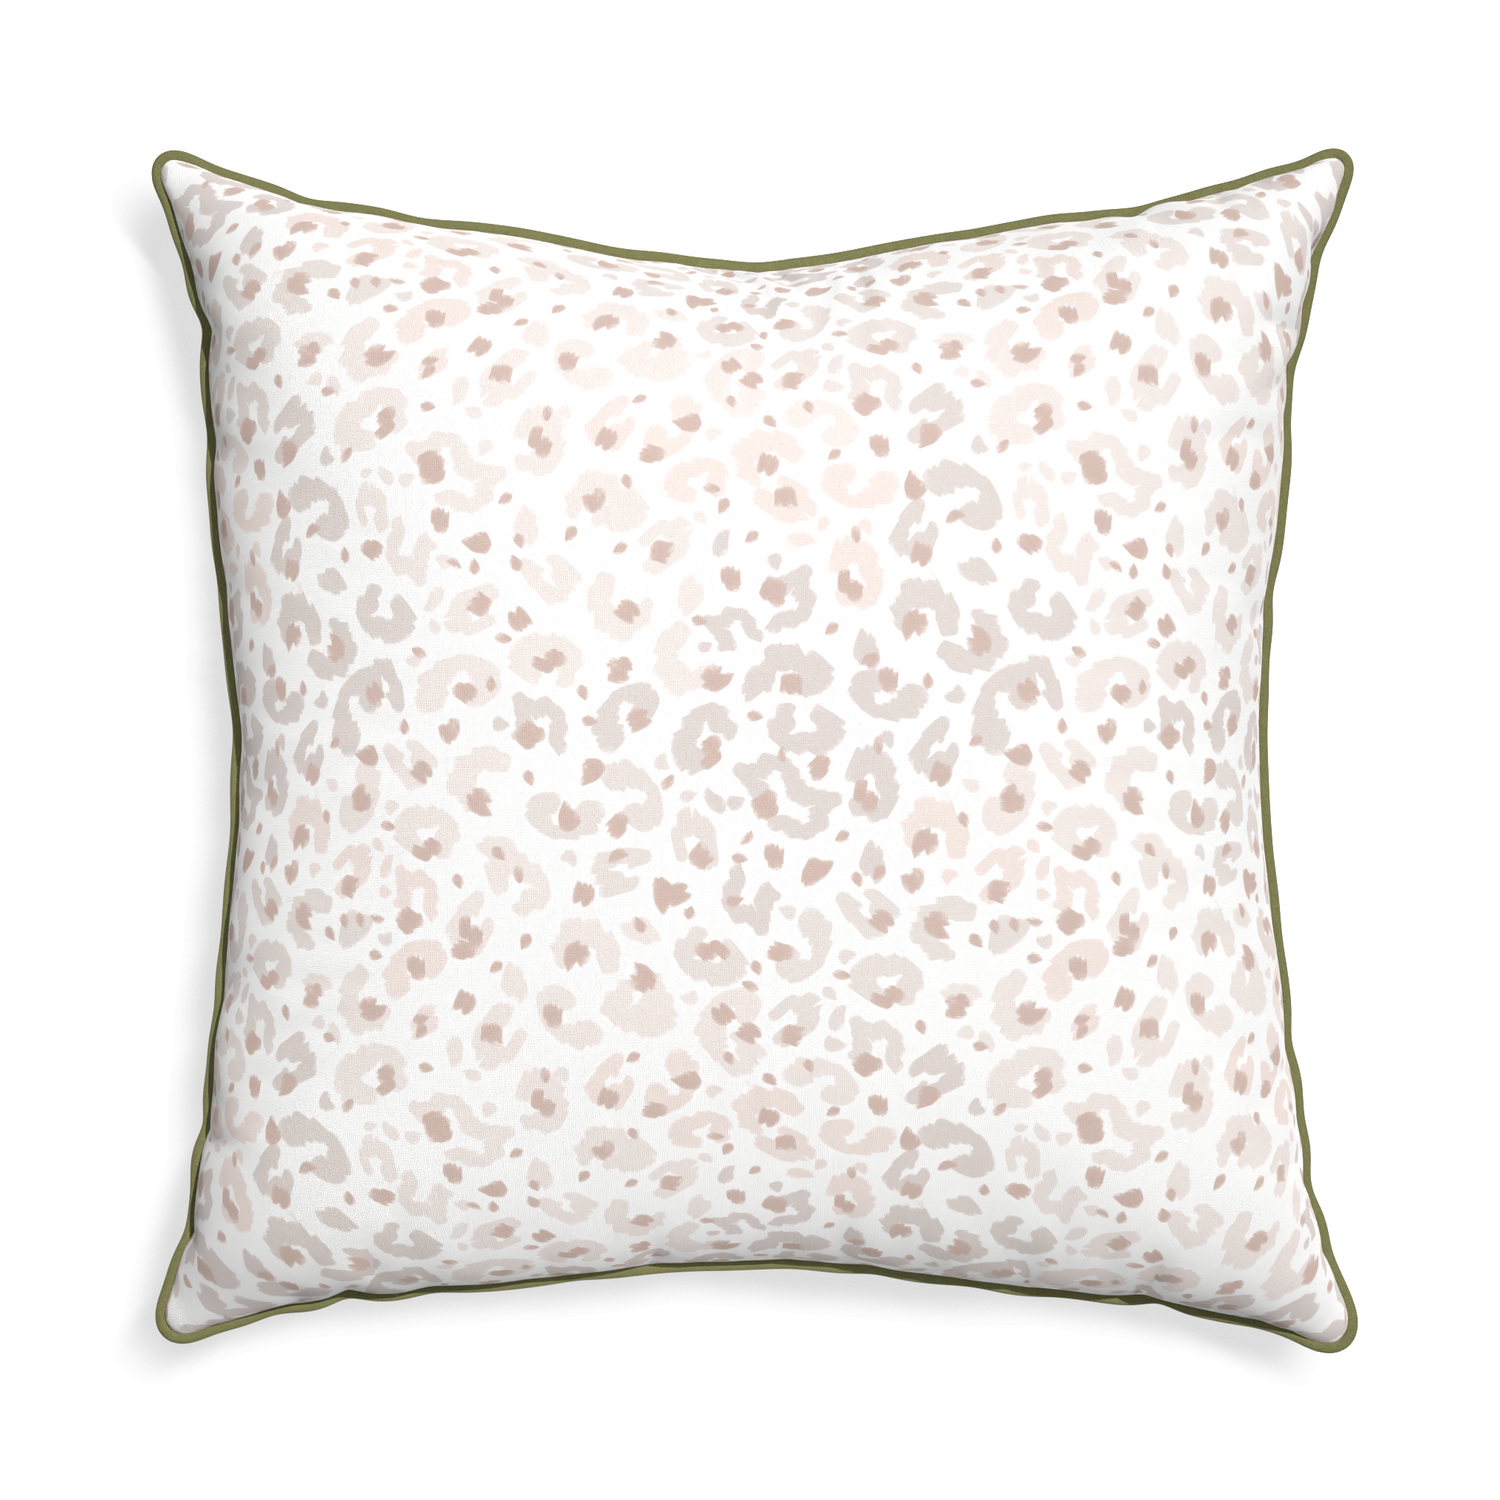 square beige animal print pillow with moss green piping